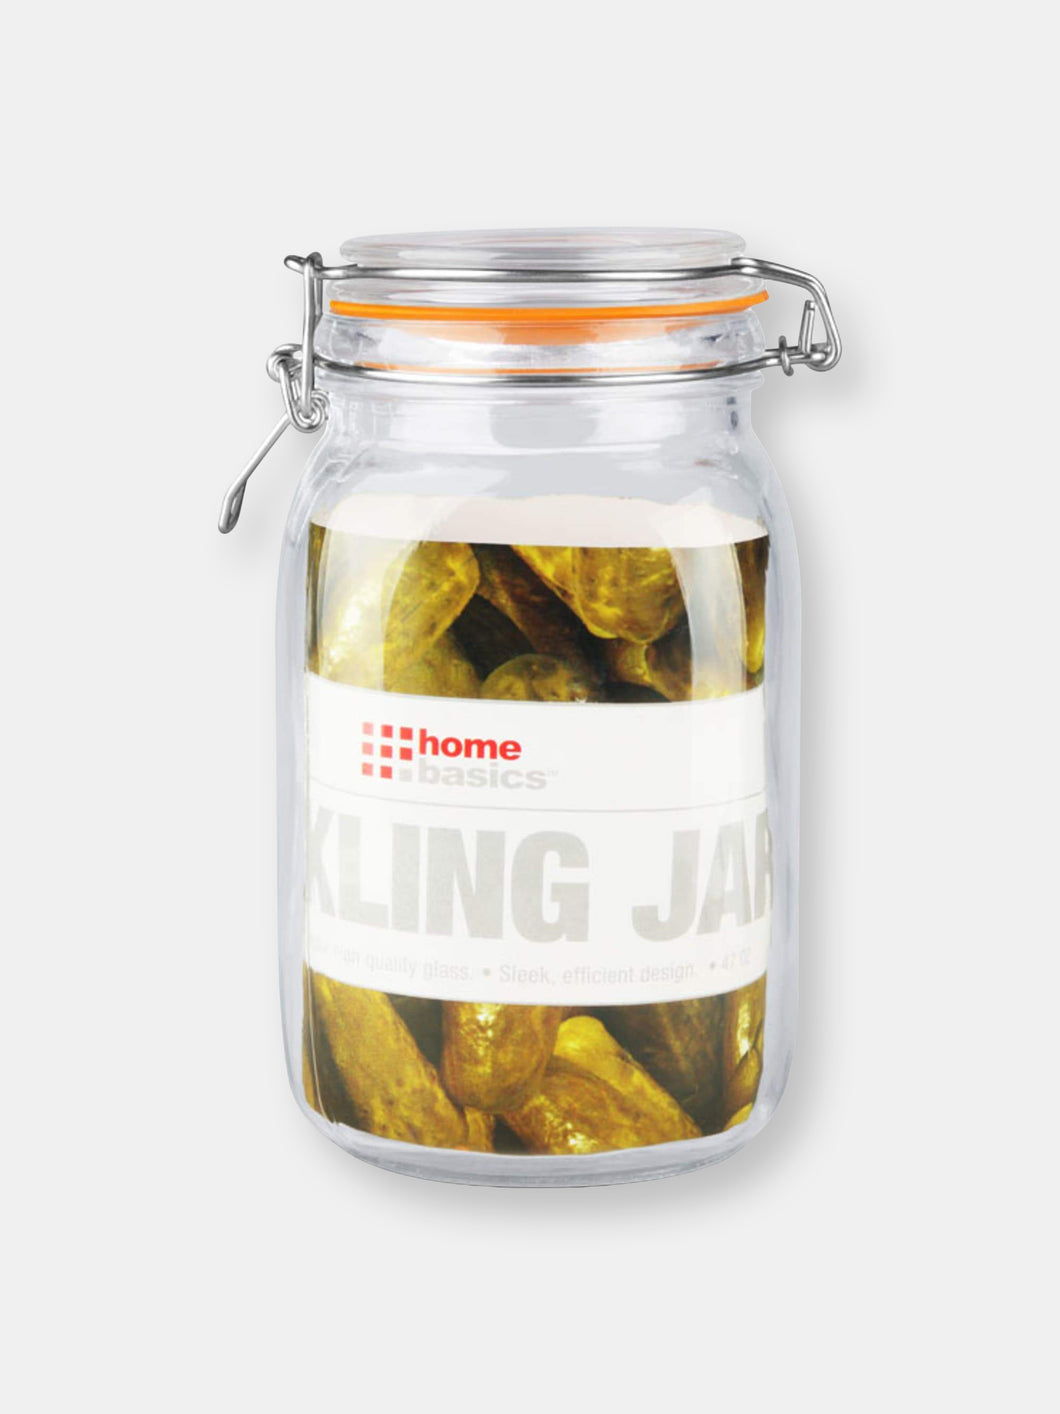 47 oz. Glass Pickling Jar with Wire Bail Lid and Rubber Seal Gasket